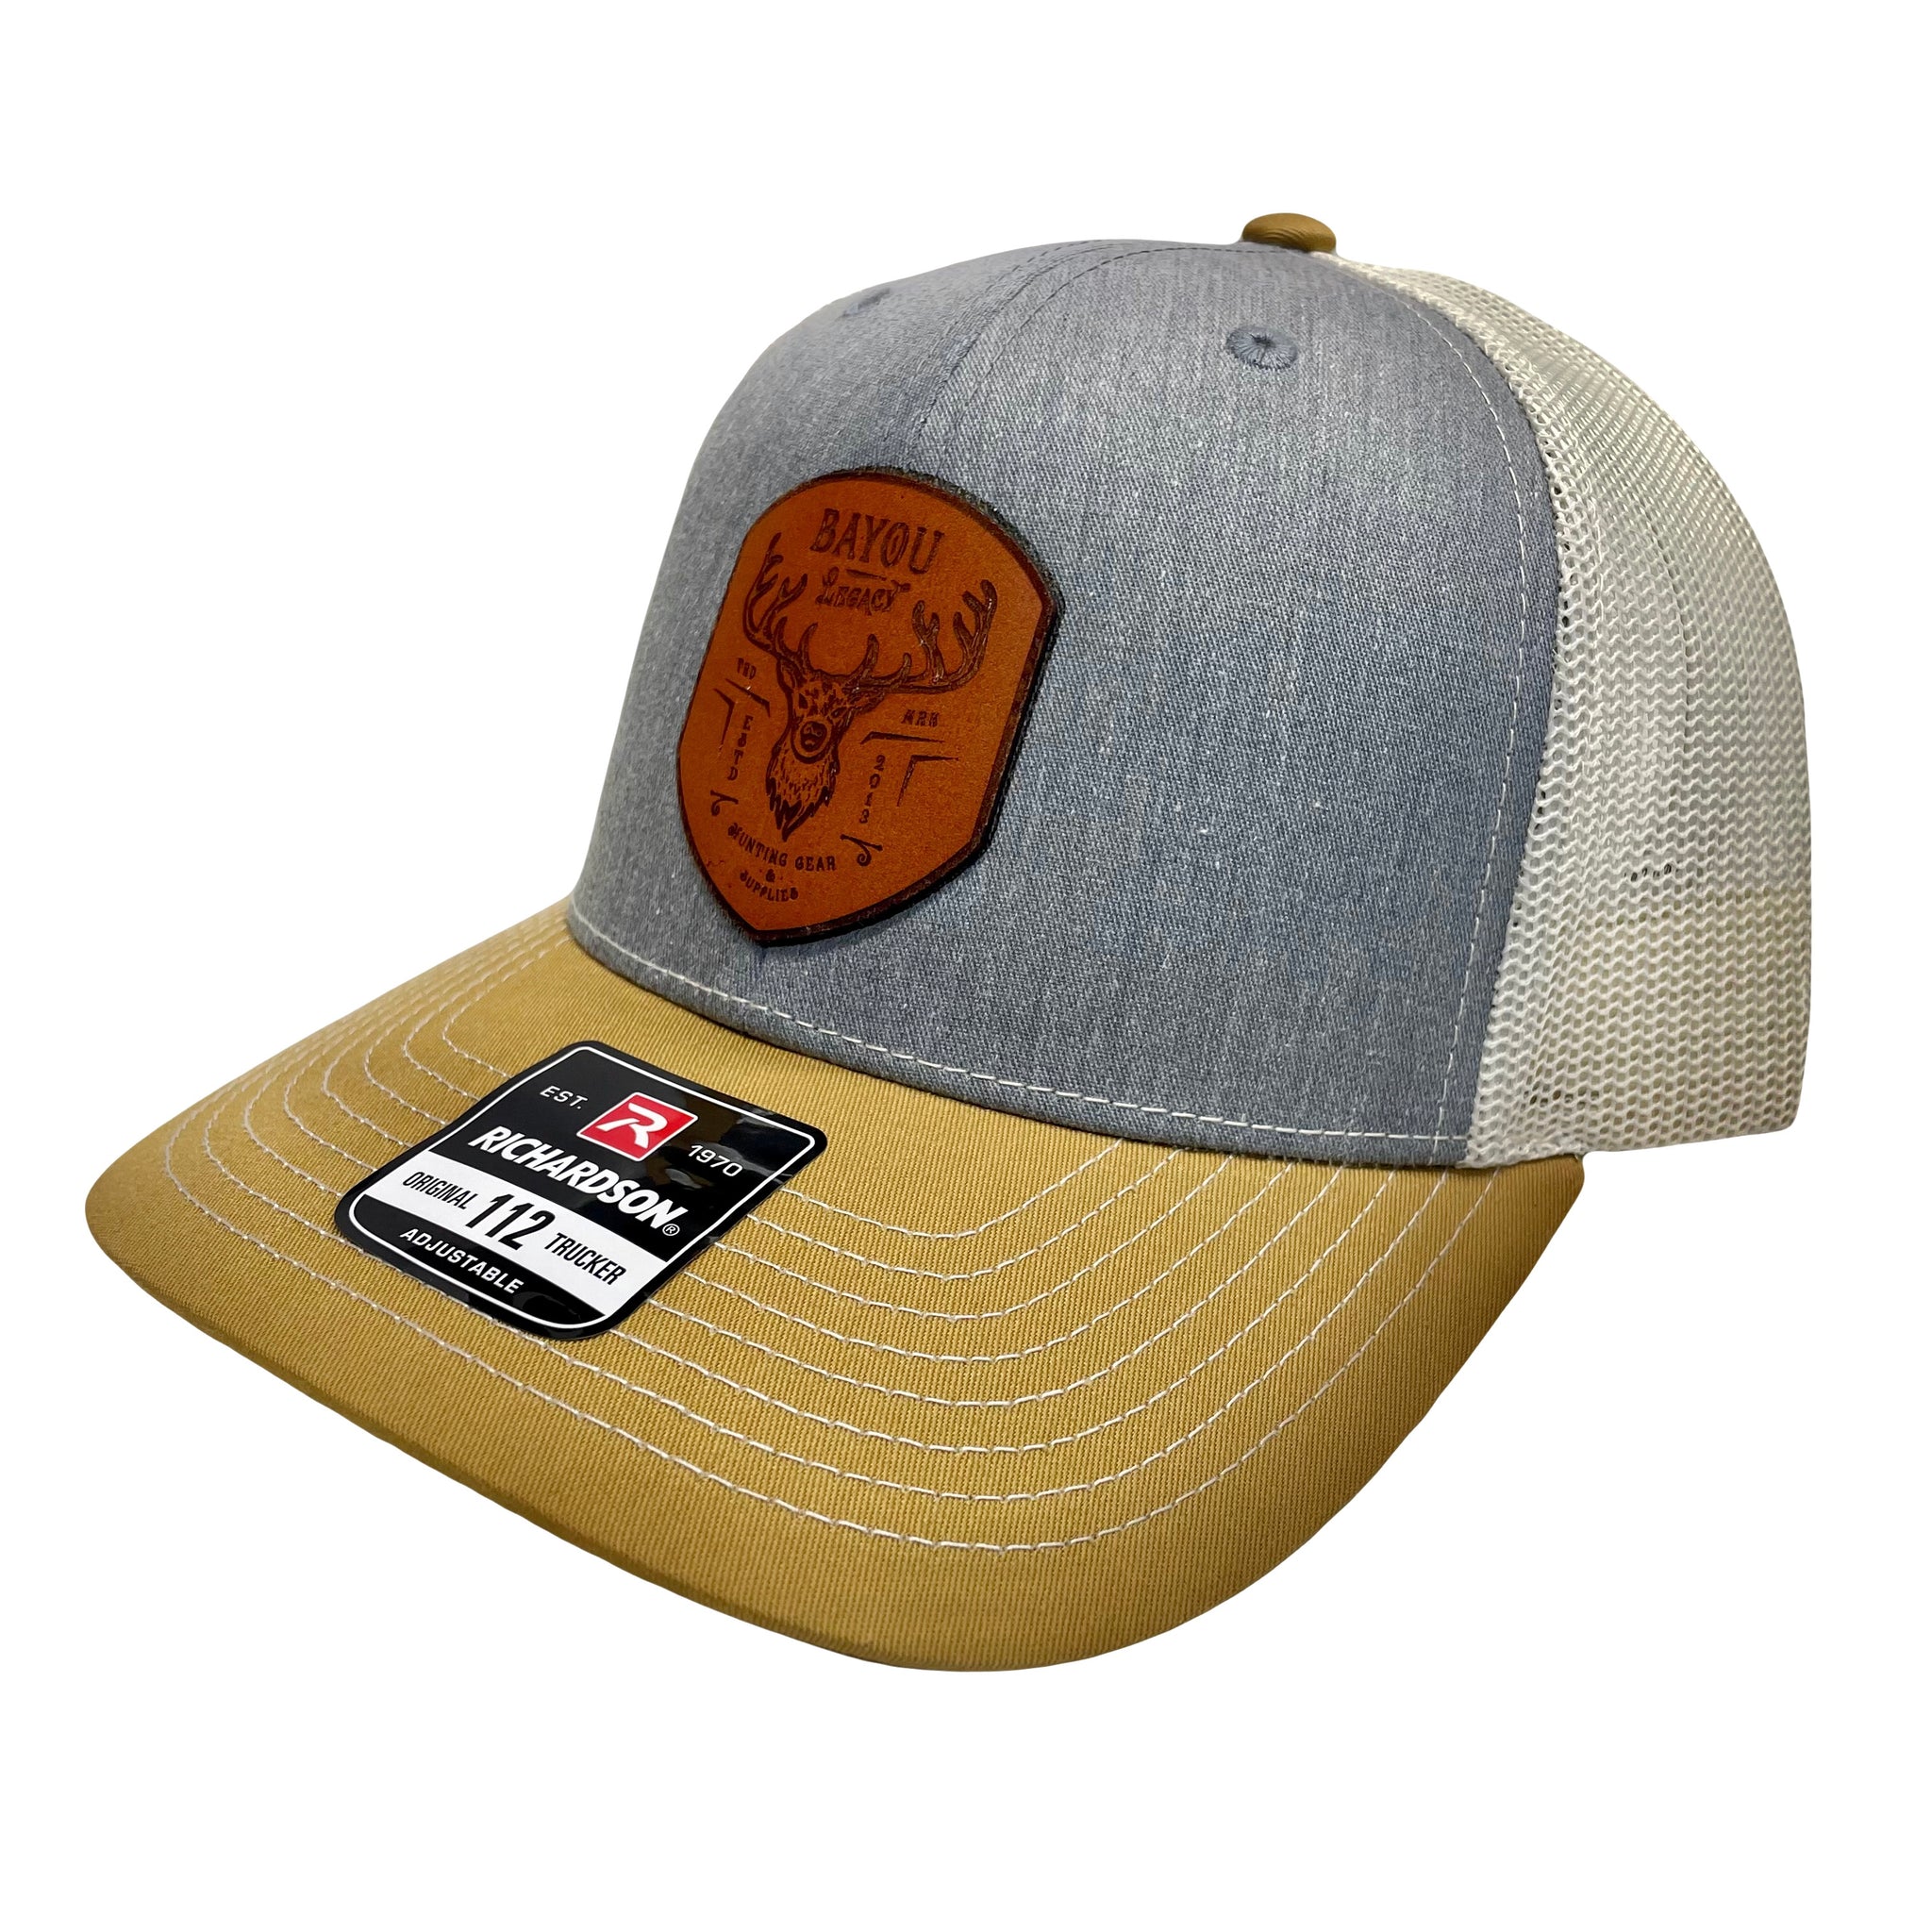 Fox & Seeker Distilled Goods Trucker Hat with Leather Patch